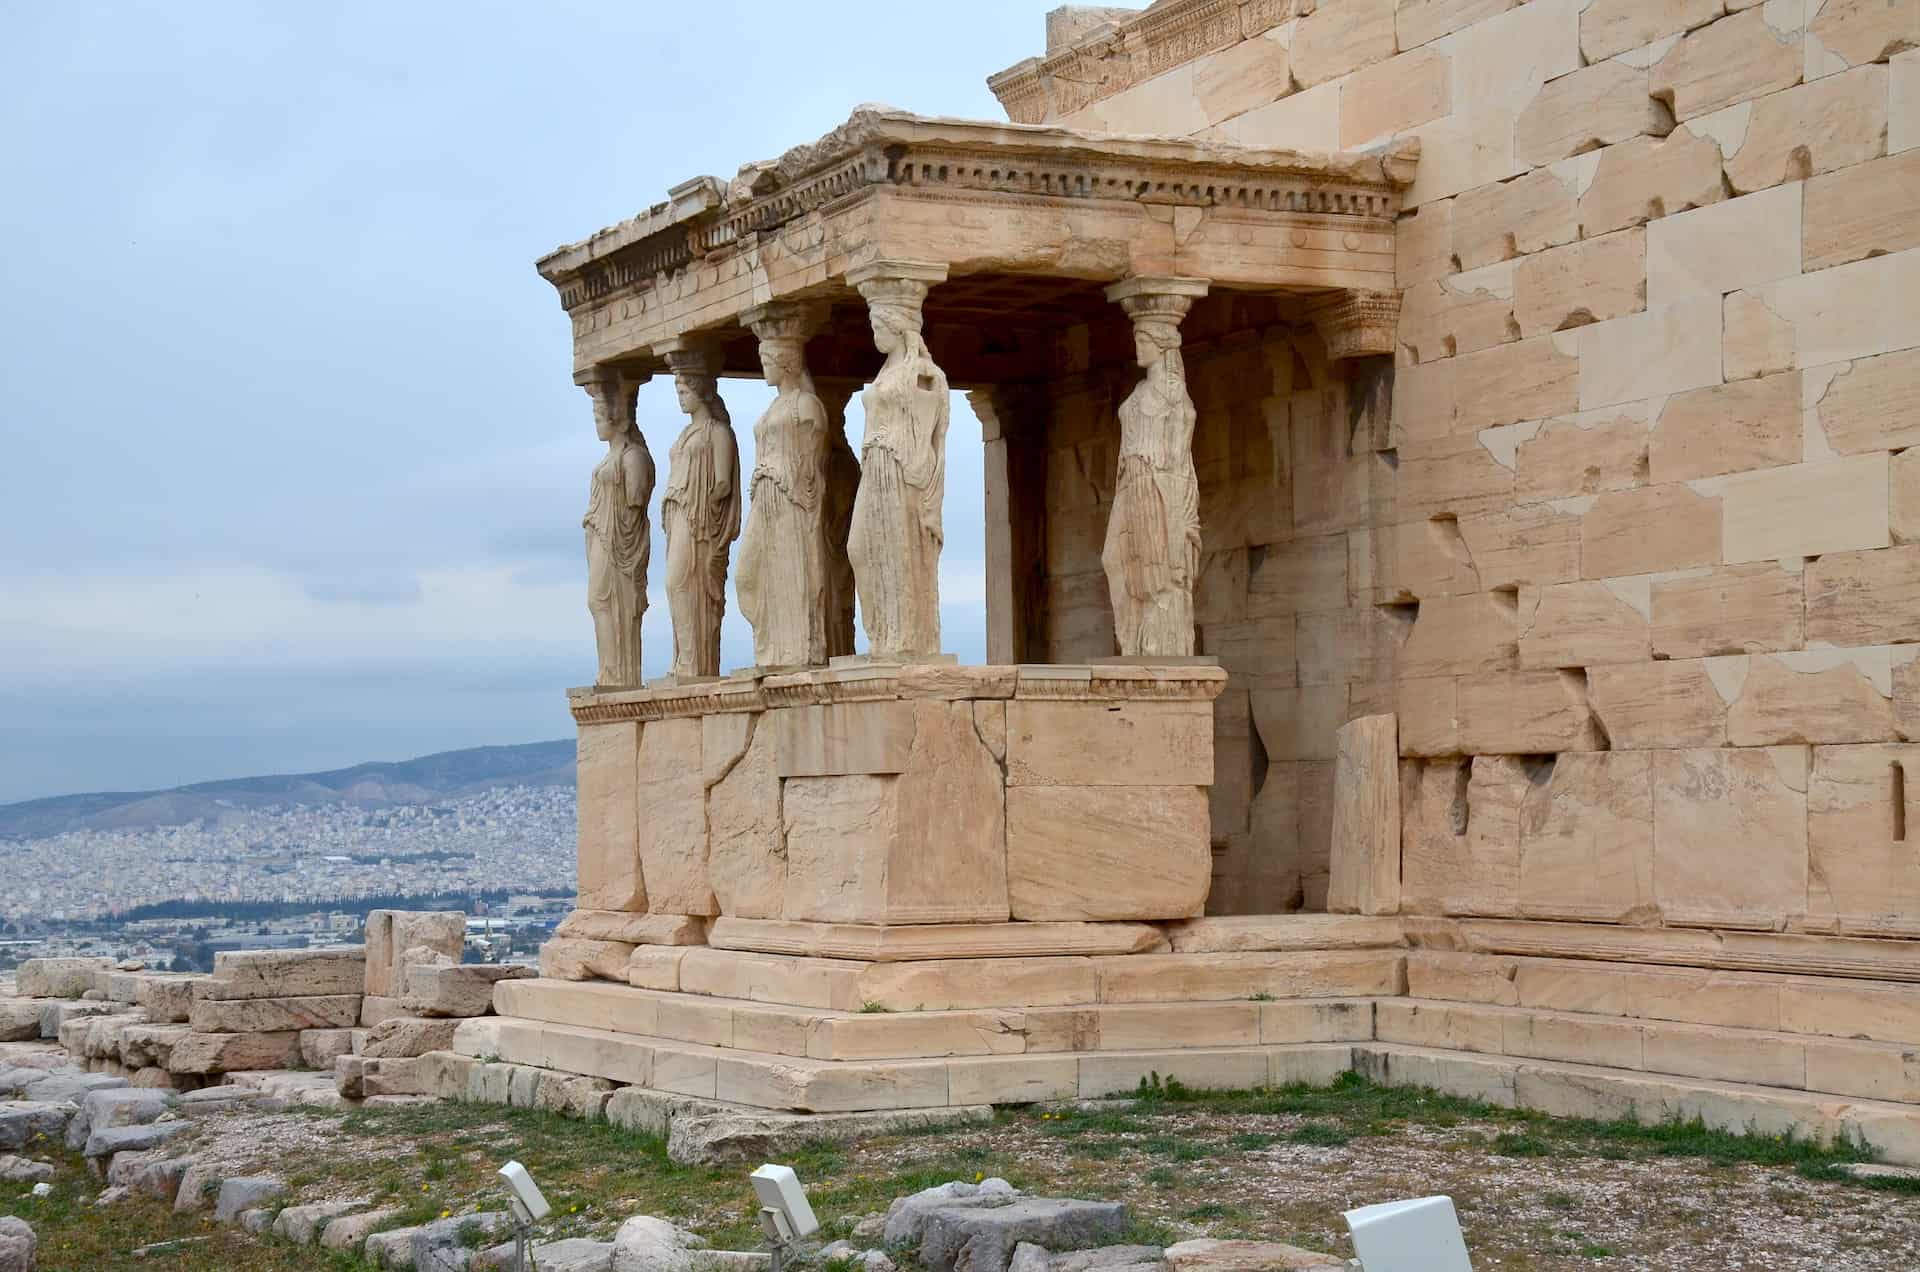 Porch of the Caryatids on the Erechtheion on the Acropolis of Athens, Greece